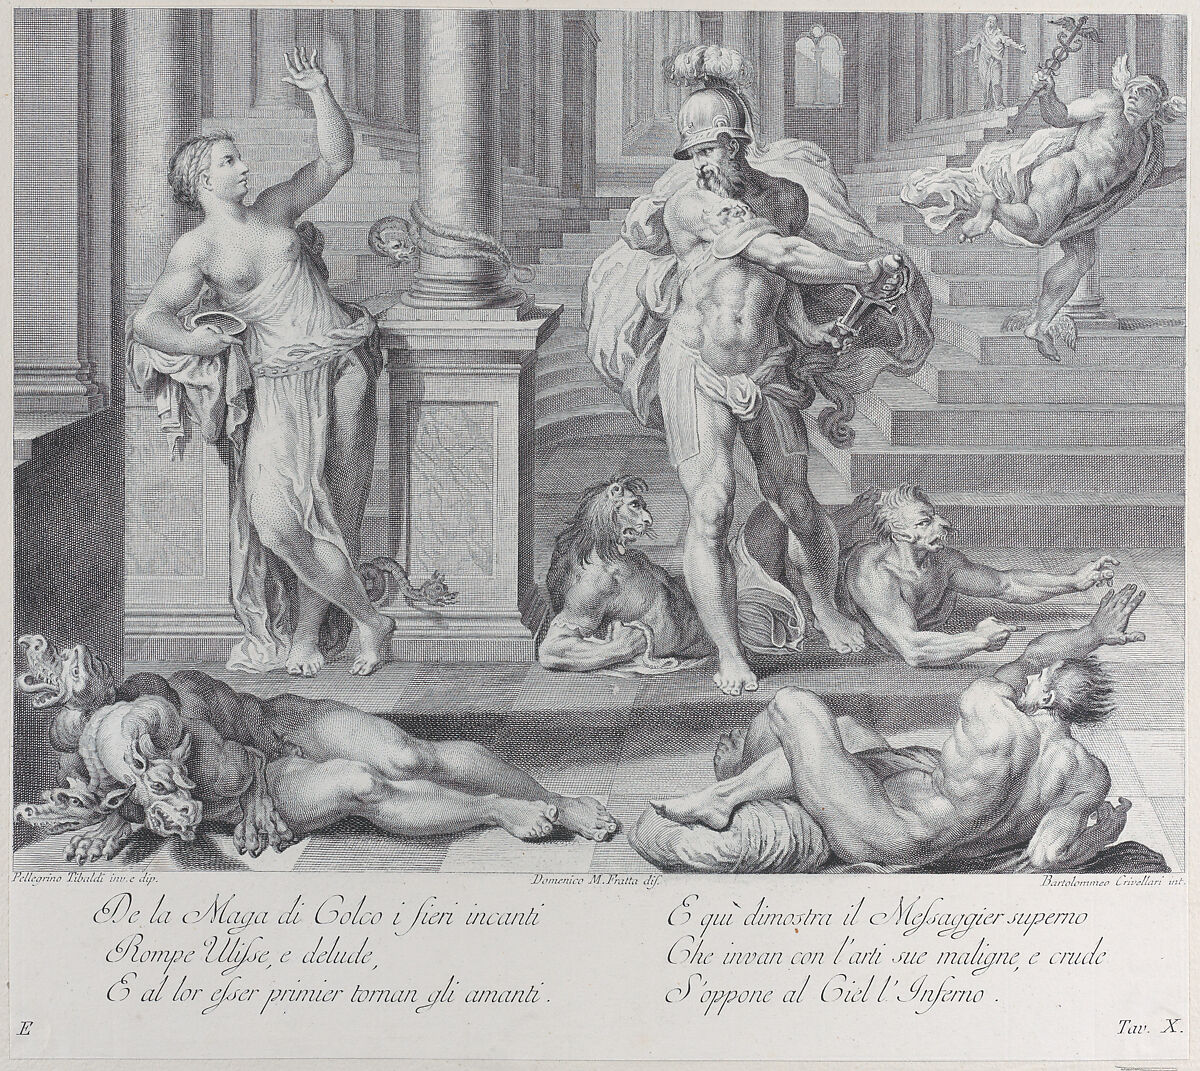 Plate 10: Ulysses compelling Circe to restore his companions' human shapes, which she had changed into monsters, Bartolomeo Crivellari (Italian, active 18th century), Etching and engraving 